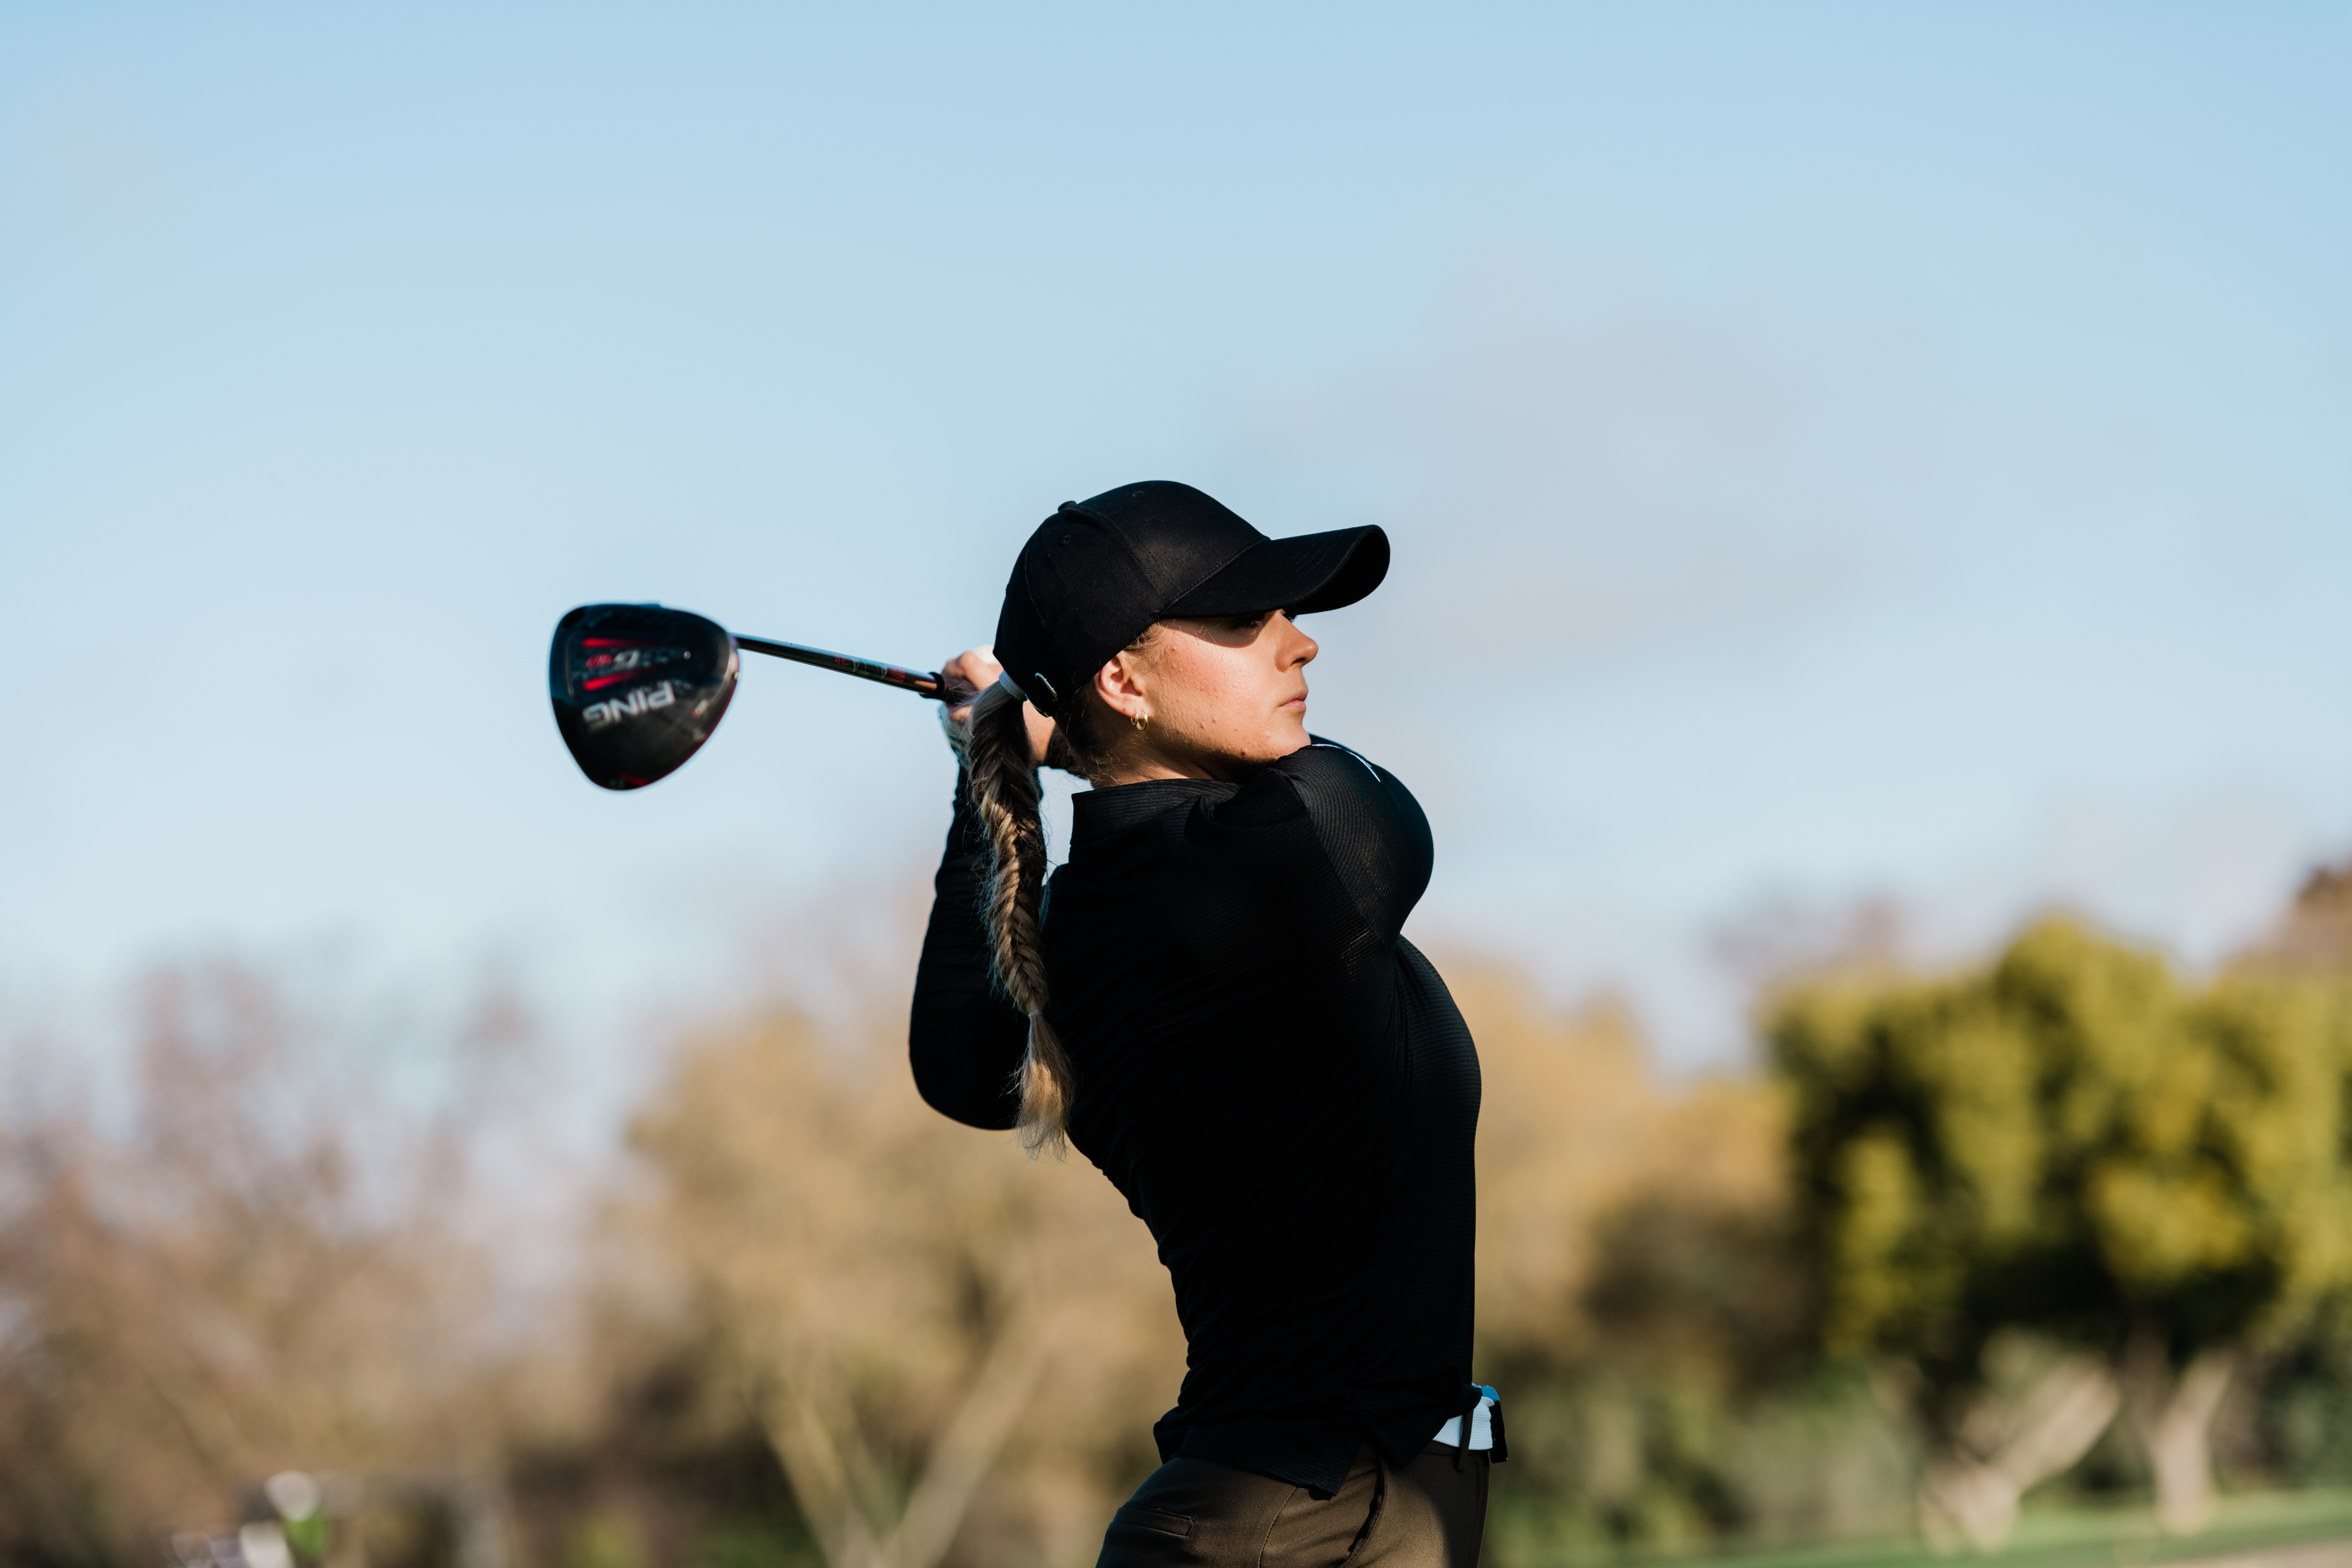 color image of a woman playing golf in black clothing and a black baseball hat, in mid swing, against a blue sky and yellow/green trees